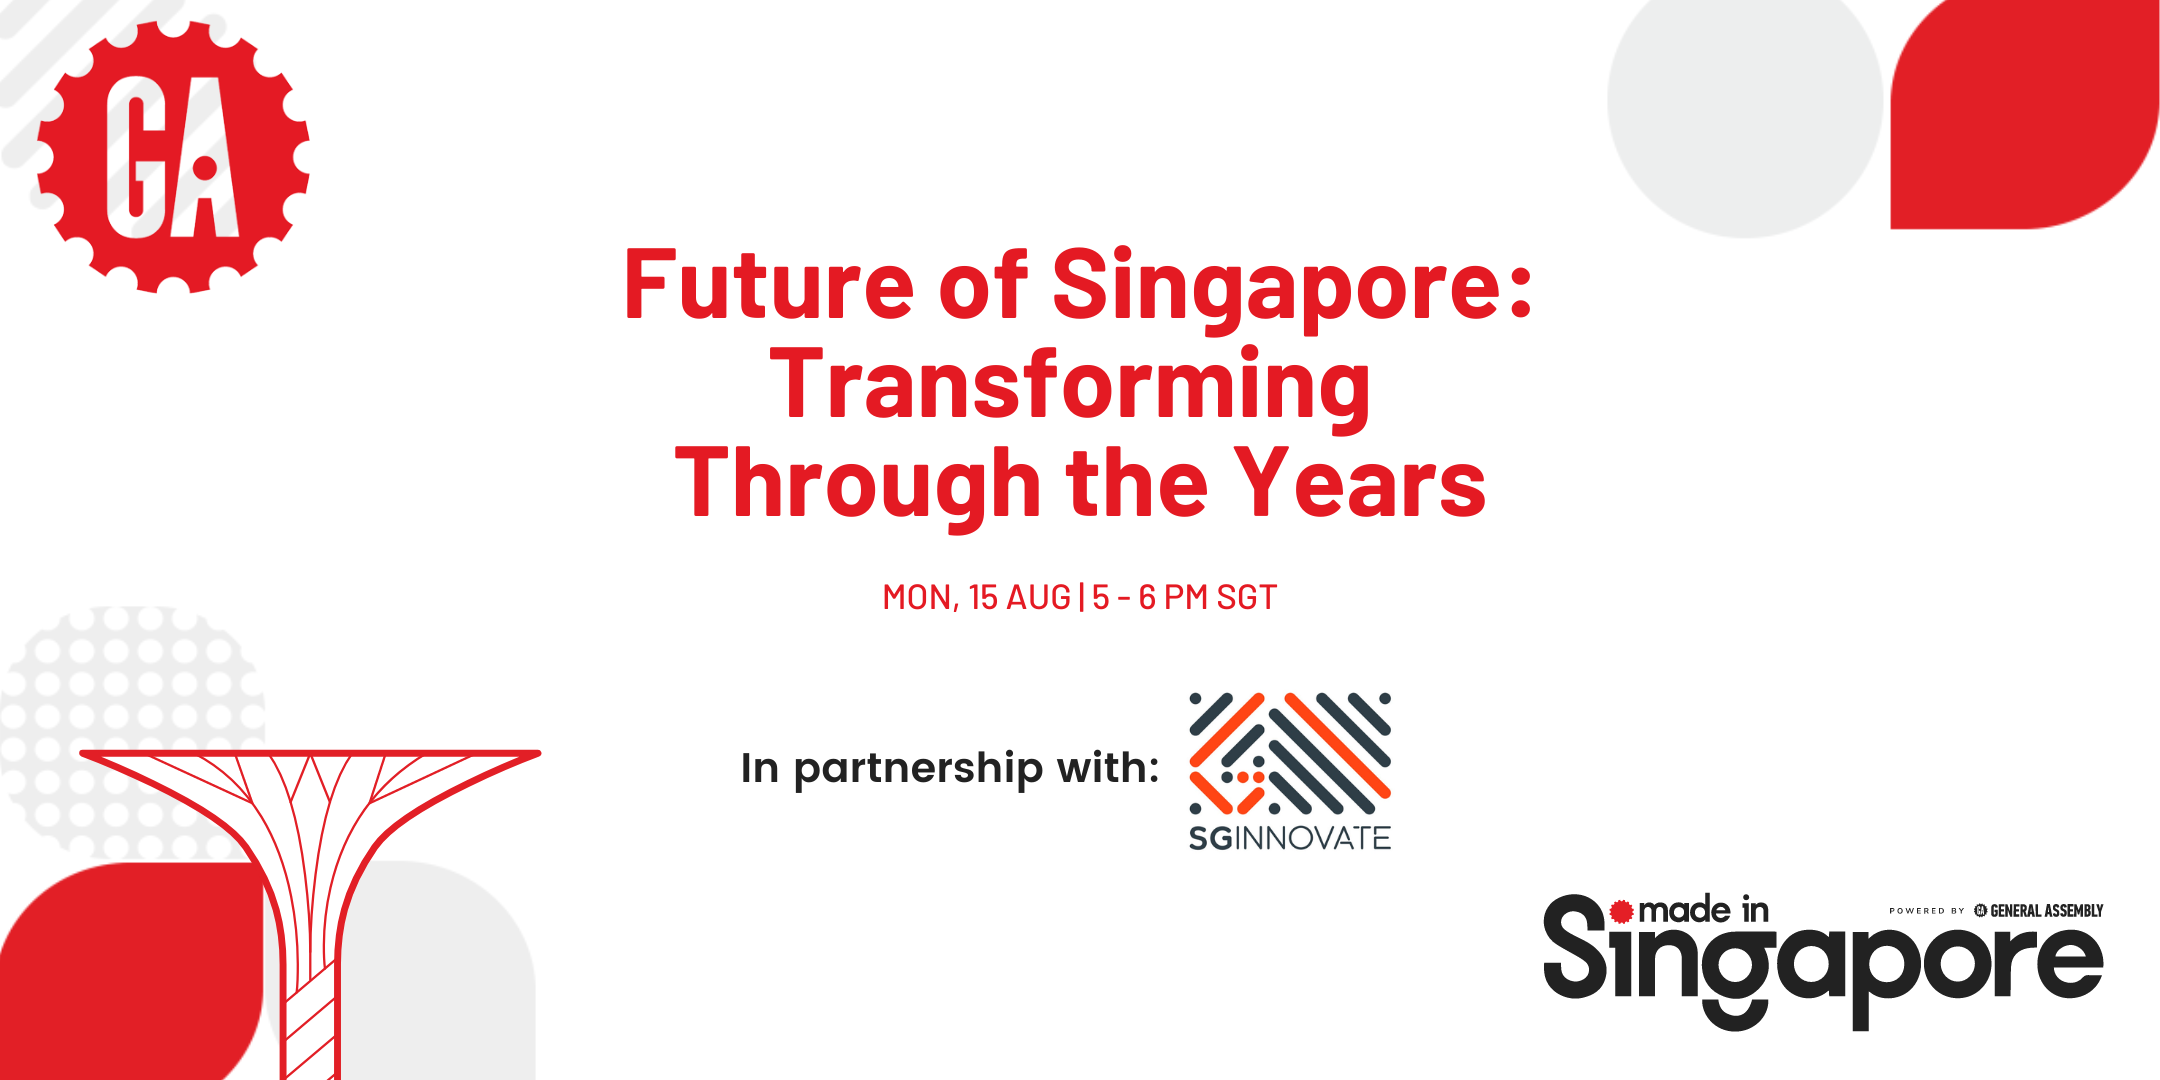 Future of Singapore - Transforming Through the Years